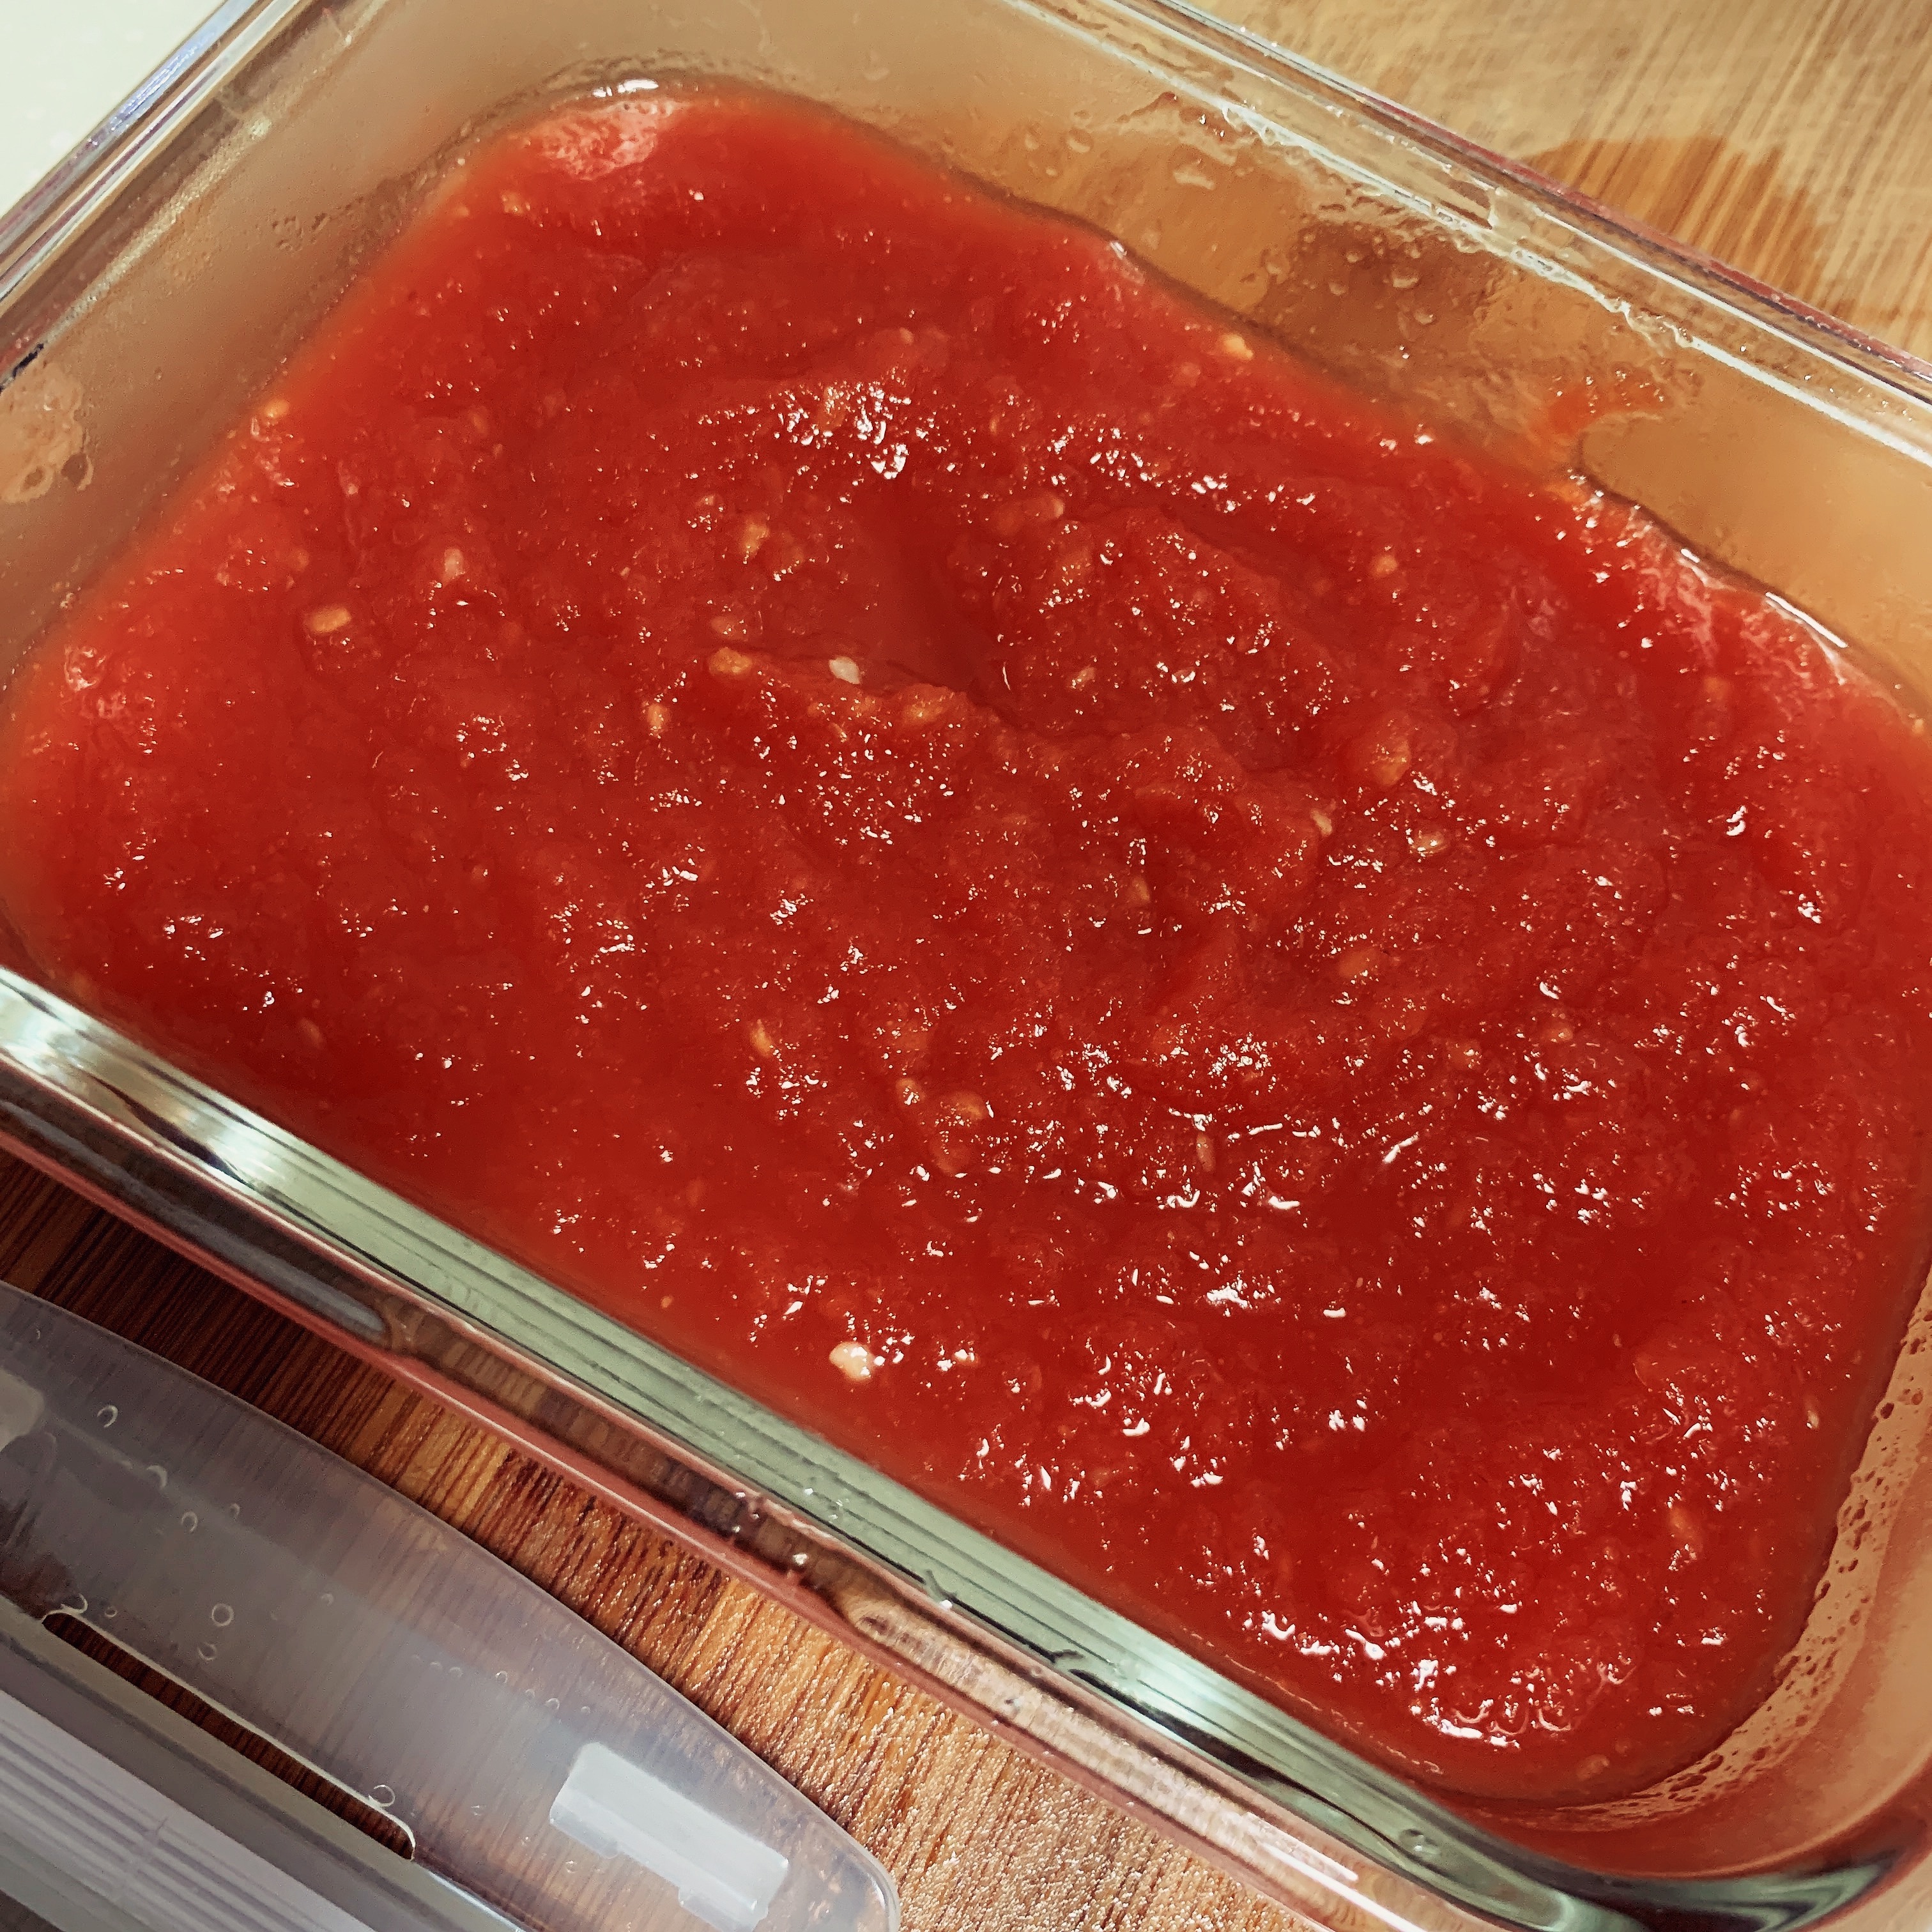 
The practice of sauce of more delicious than KFC tomato sand department